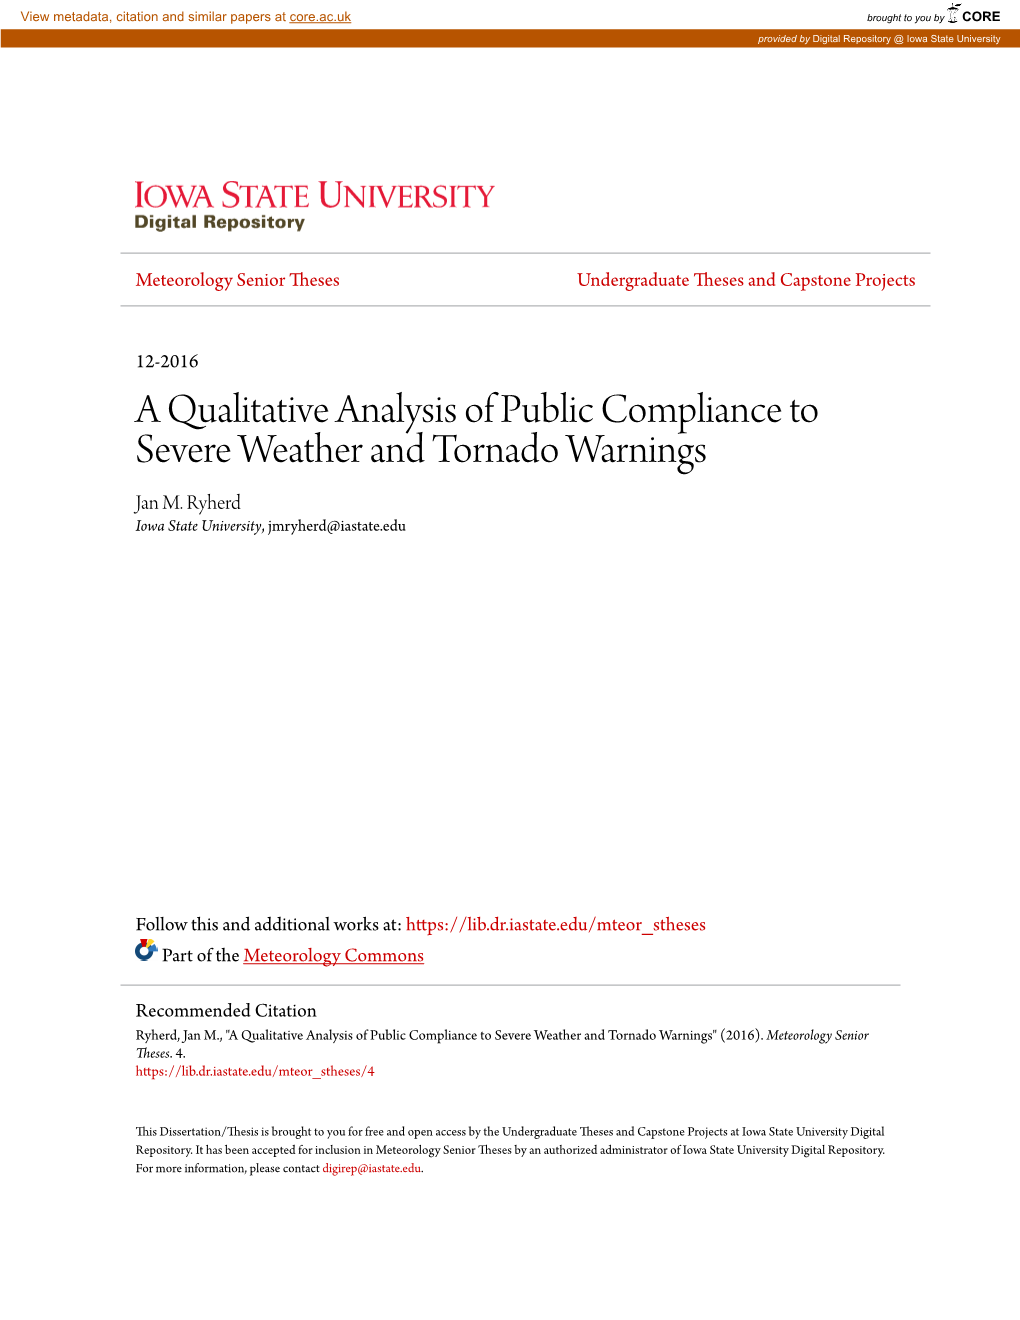 A Qualitative Analysis of Public Compliance to Severe Weather and Tornado Warnings Jan M